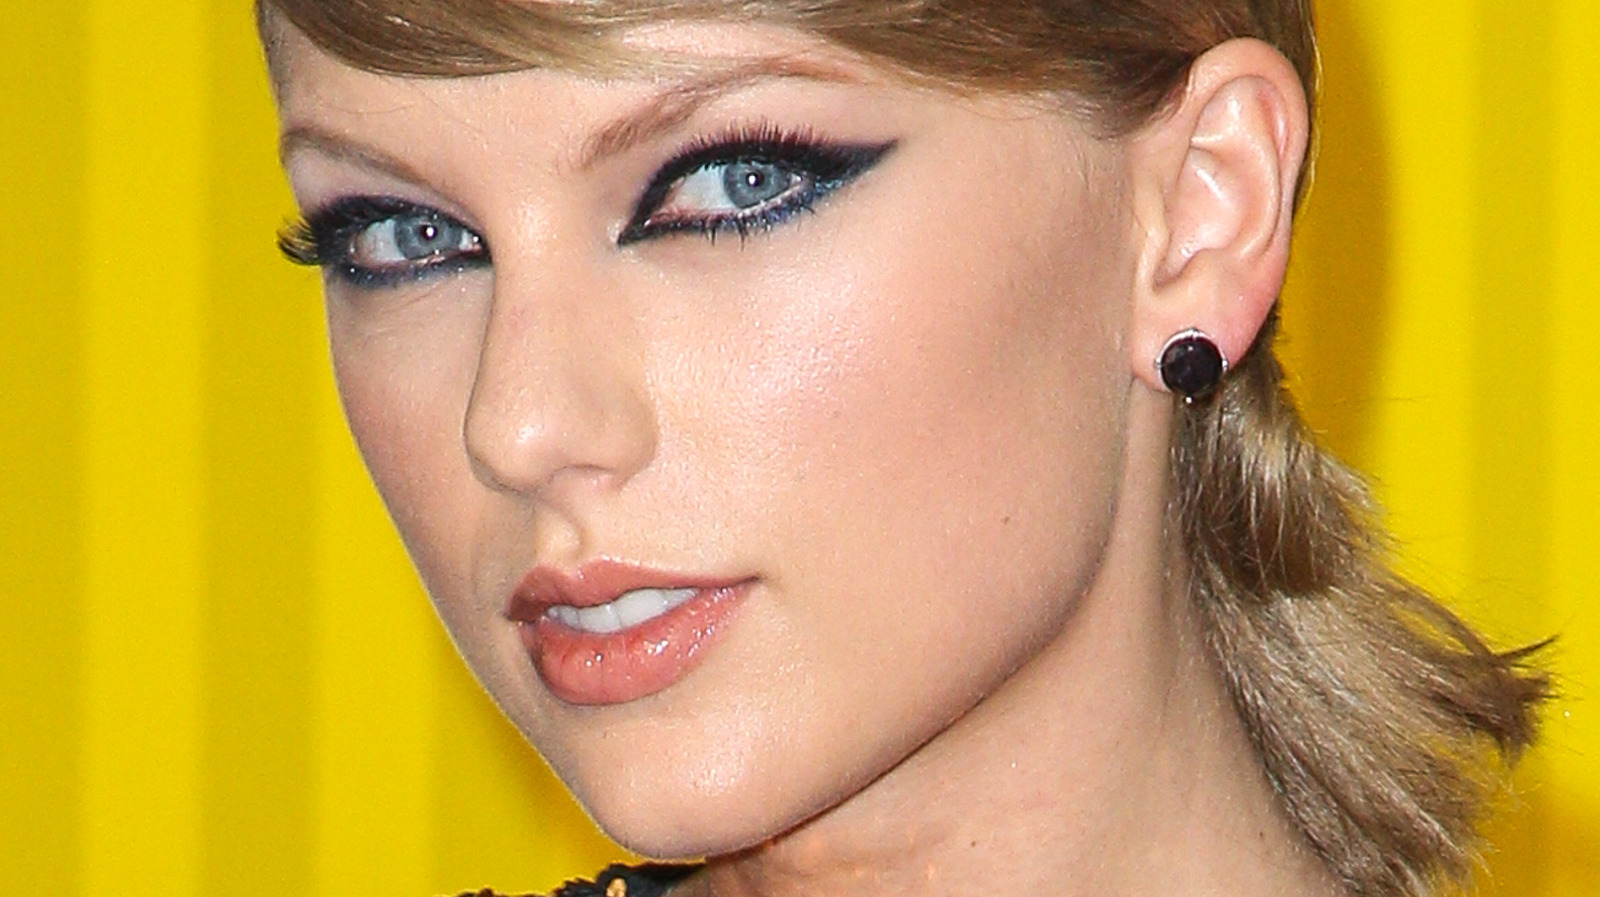 Who Was Taylor Swift’s Most Brutal Feud With? – Exclusive Survey